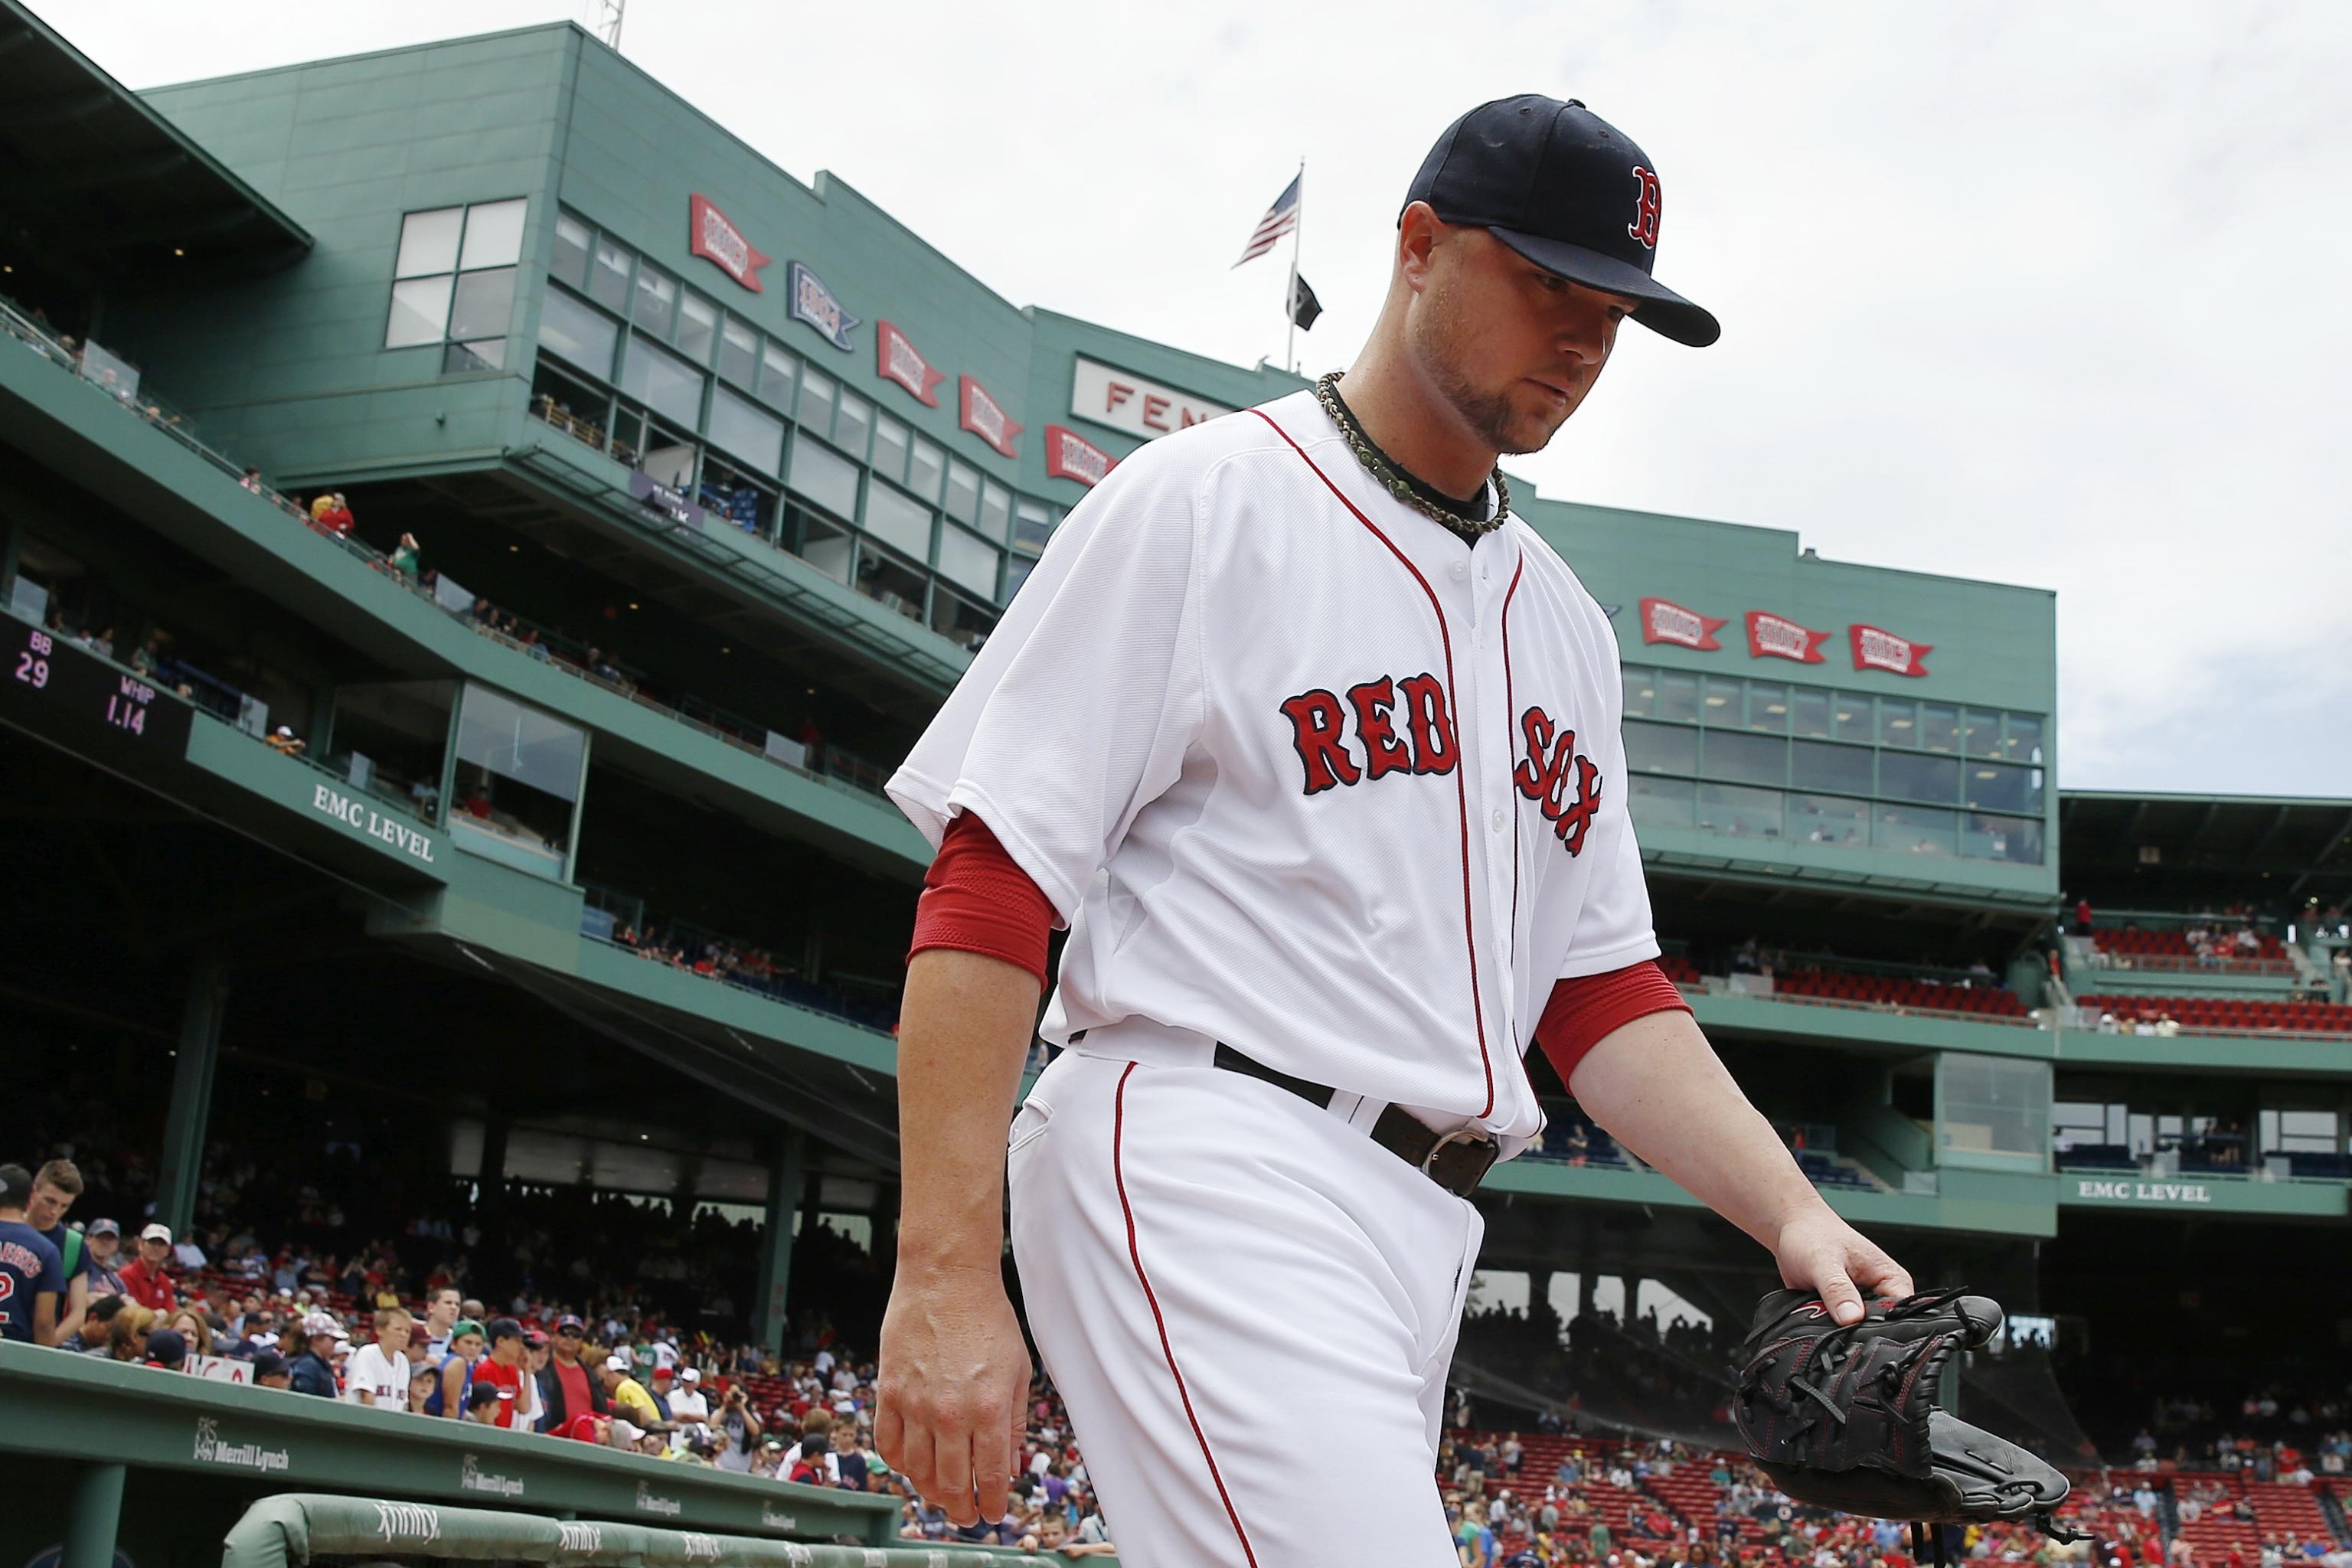 Jon Lester, ex Boston Red Sox starter, signs with Nationals on 1-year deal  (reports) 